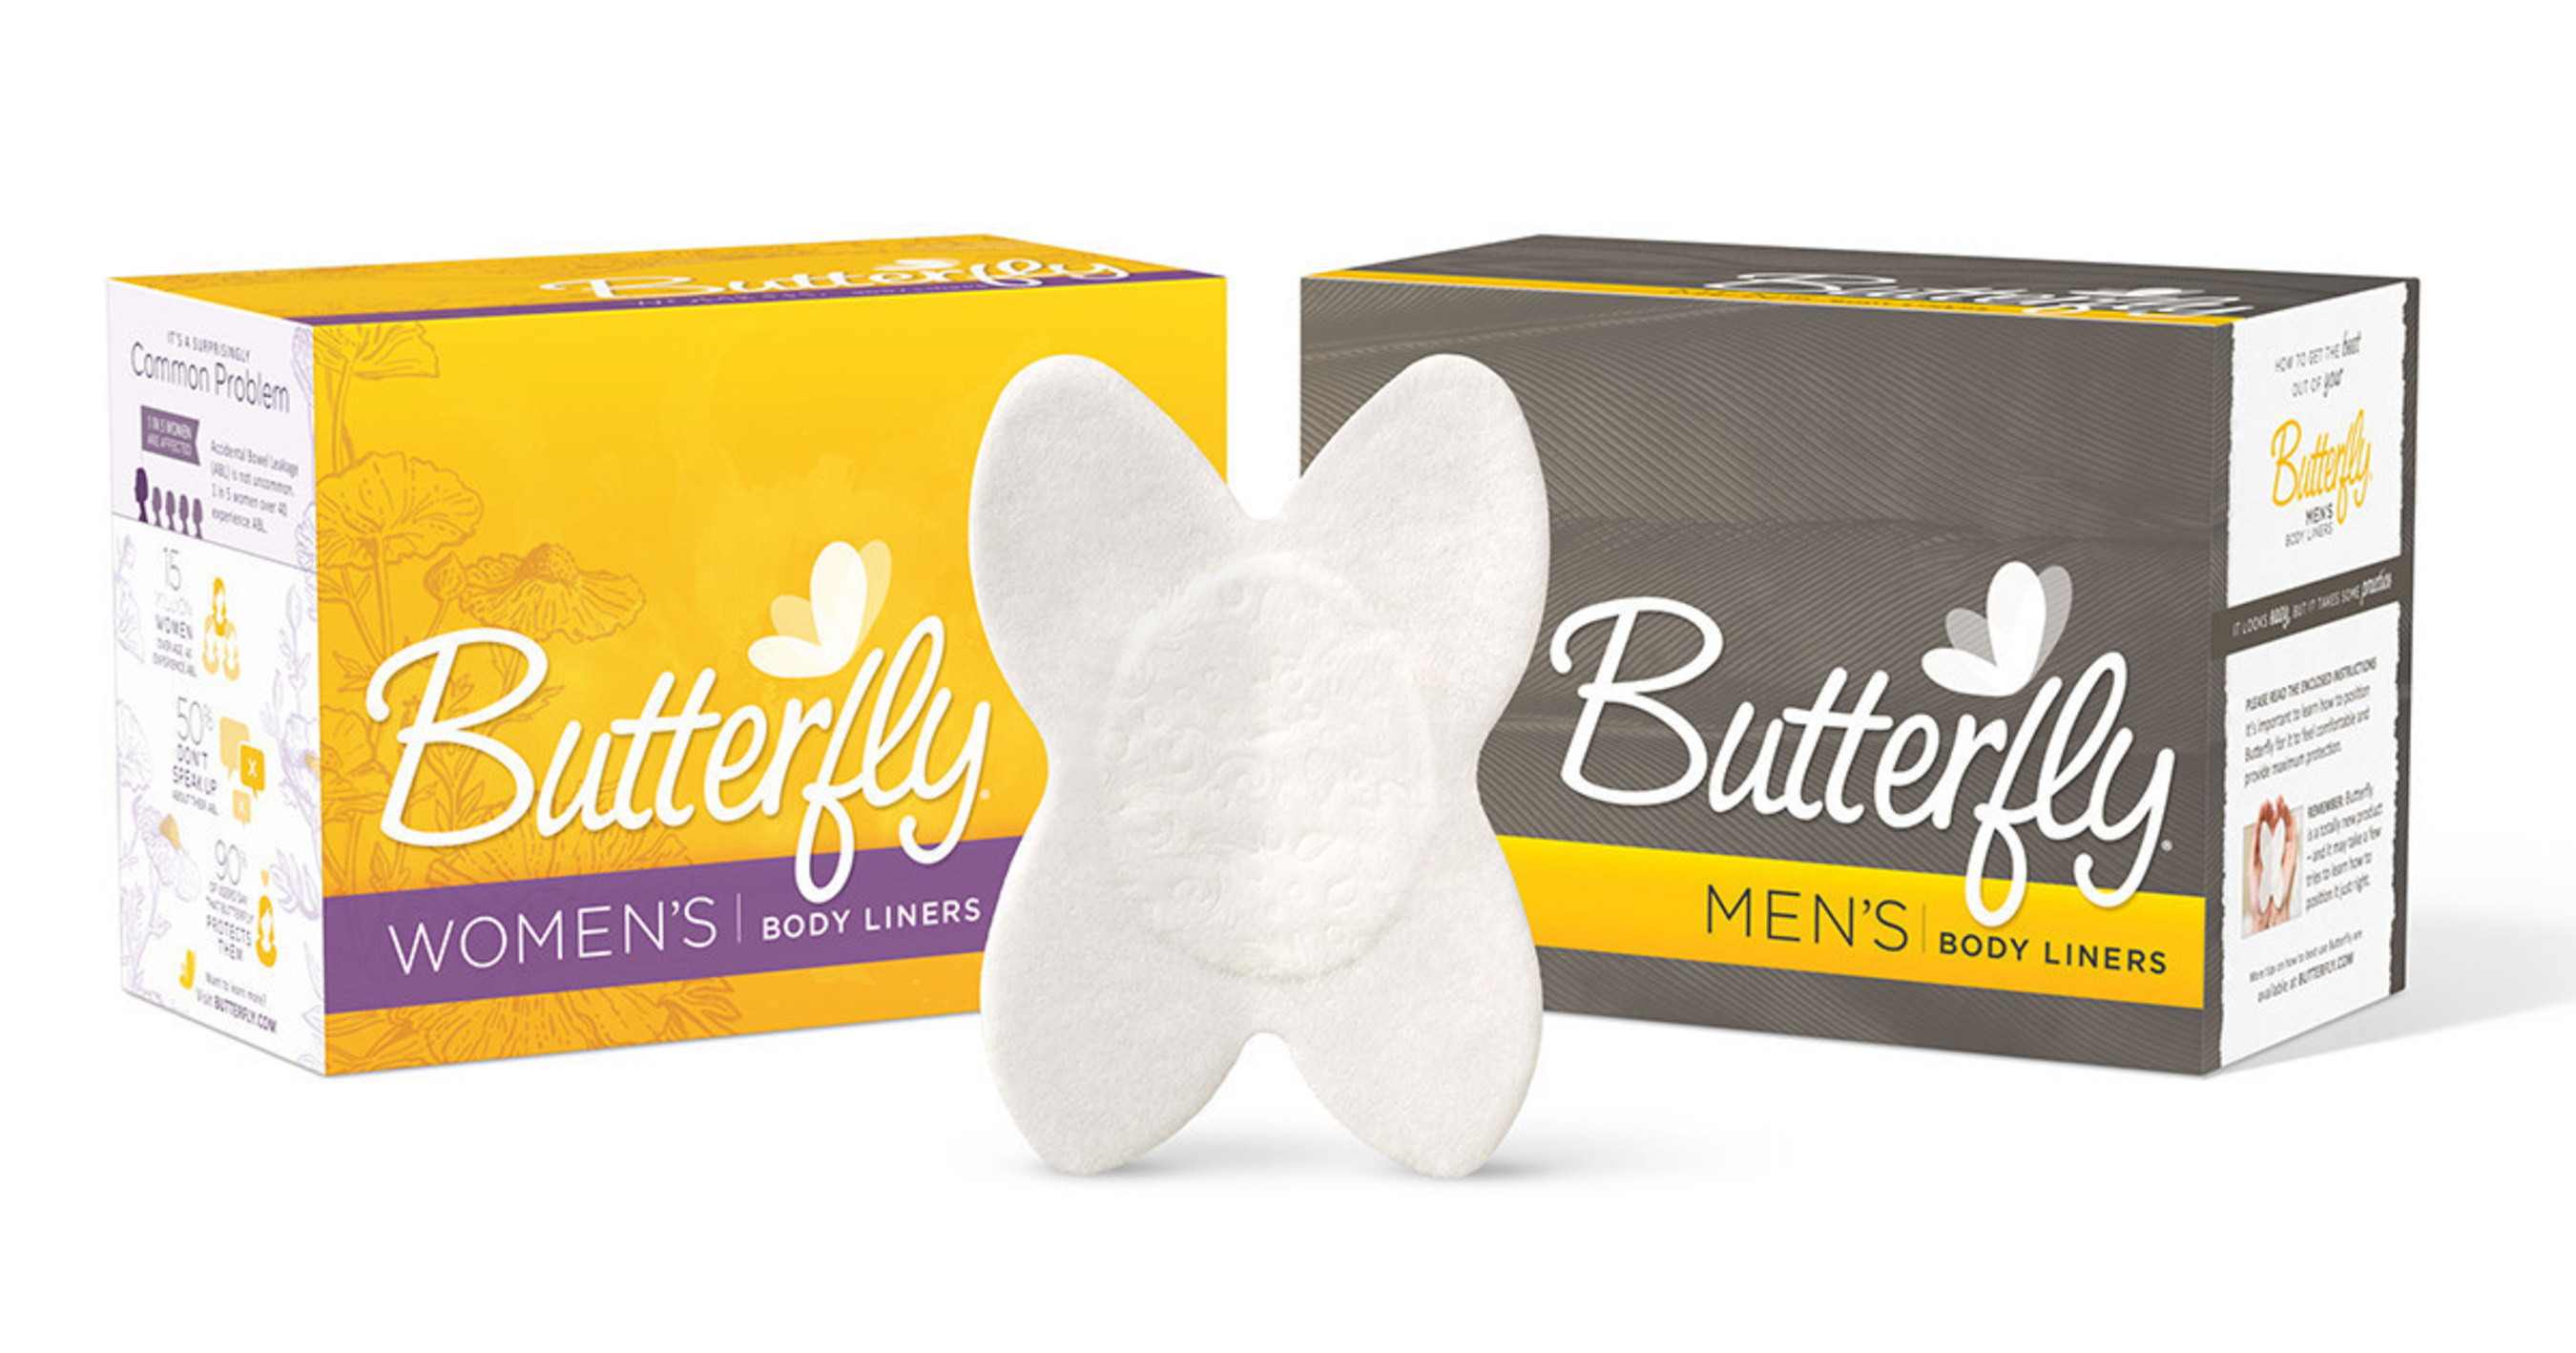 Butterfly Health Launches Men's Version of Award-Winning Butterfly Pads for Sensitive Bowels and Anal Leakage. For more information go to Butterfly.com